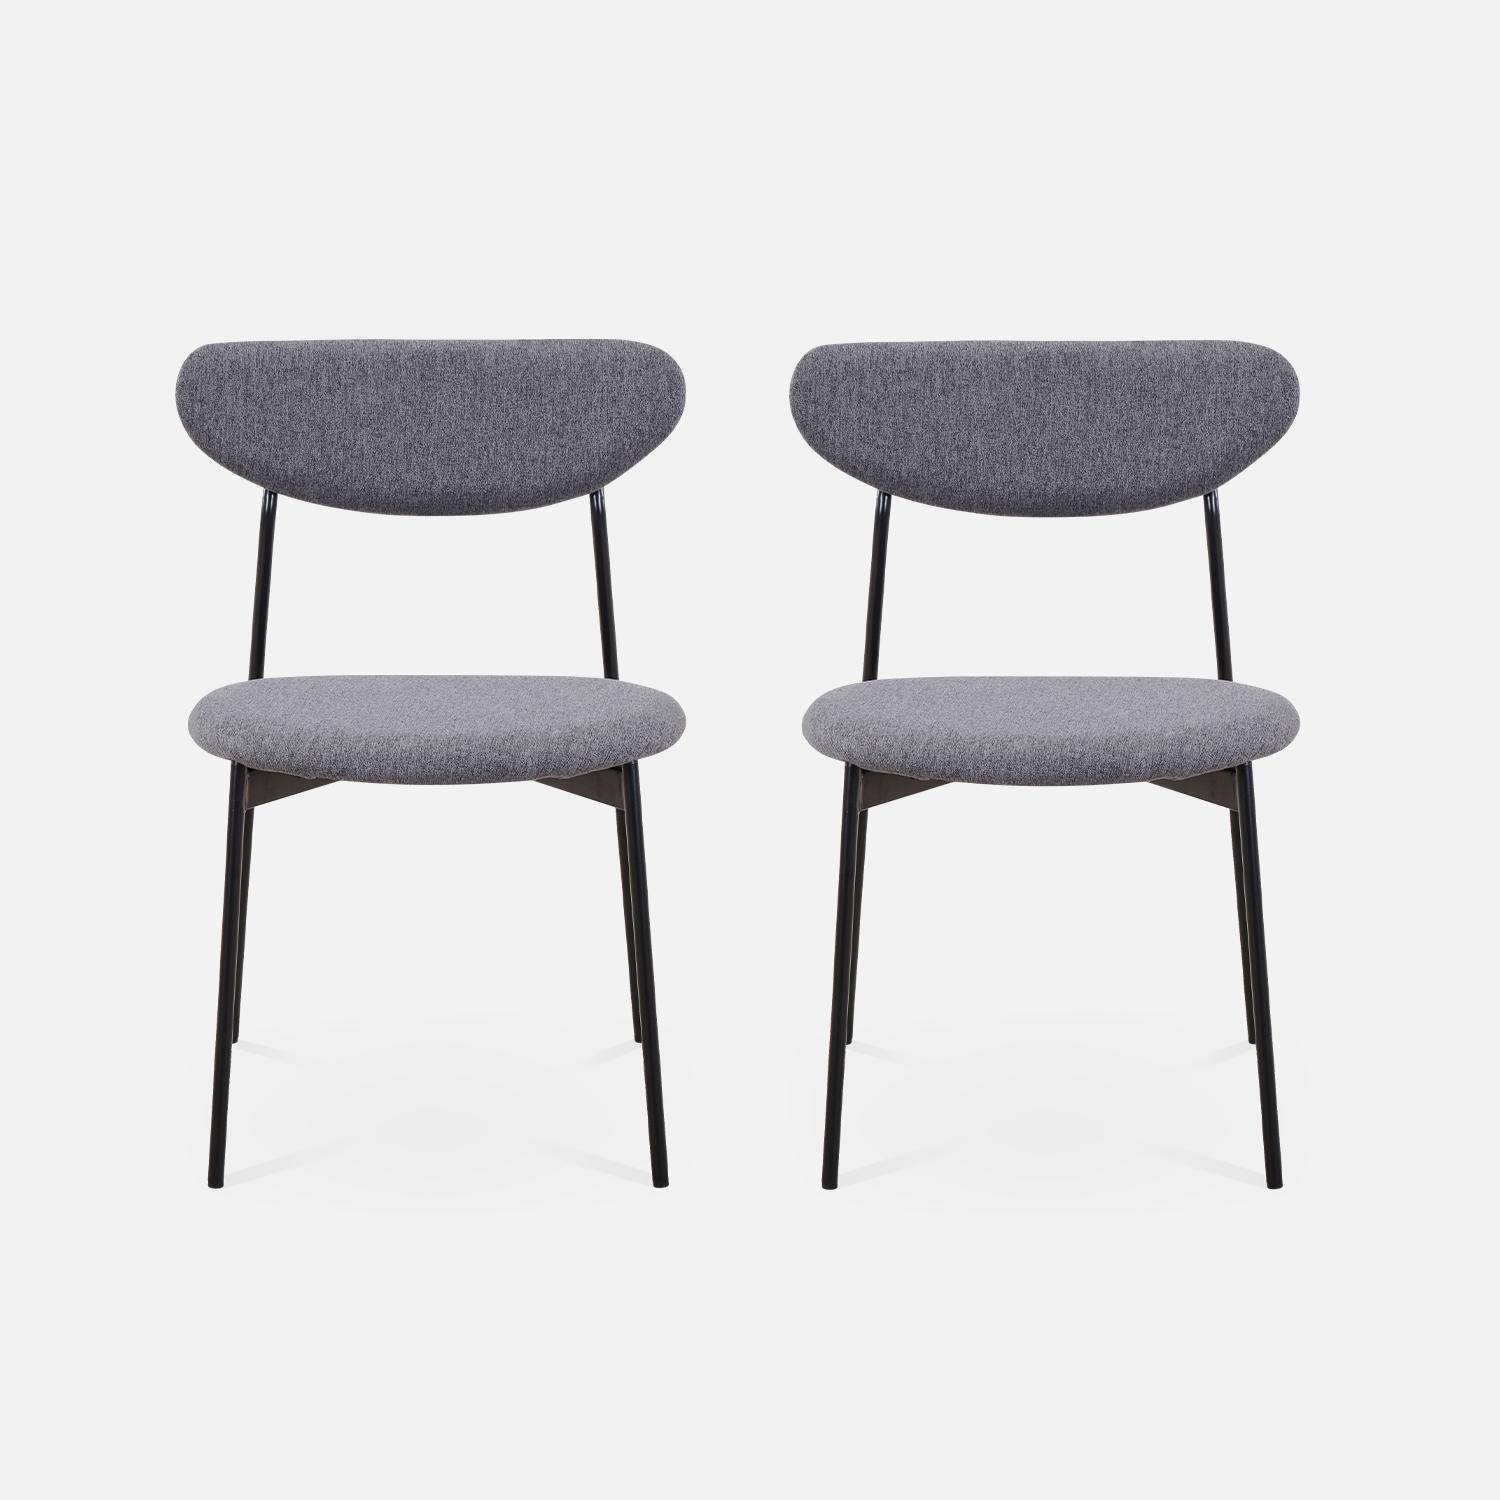 Set of 2 retro style dining chairs with steel legs - Arty - Dark Grey,sweeek,Photo4